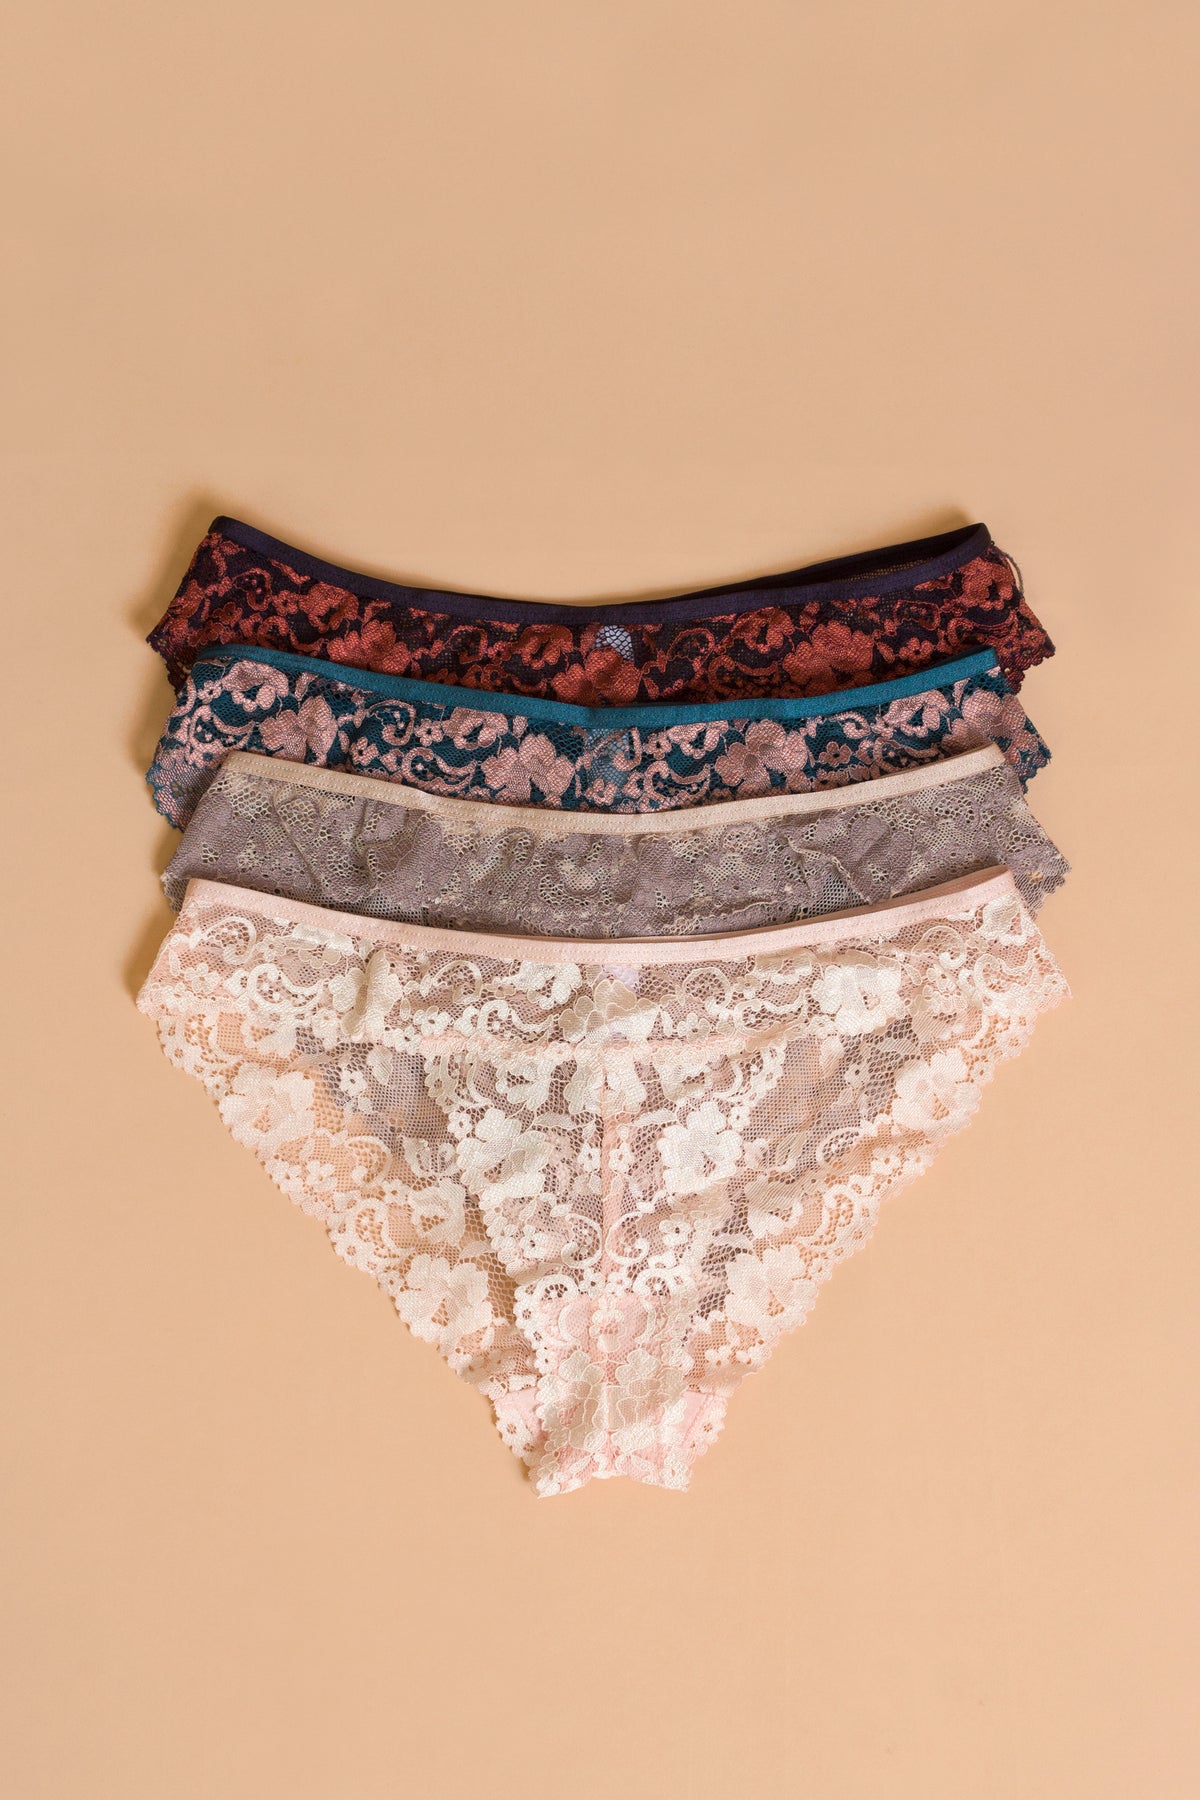 Lace panty flatlay, in assorted colors.